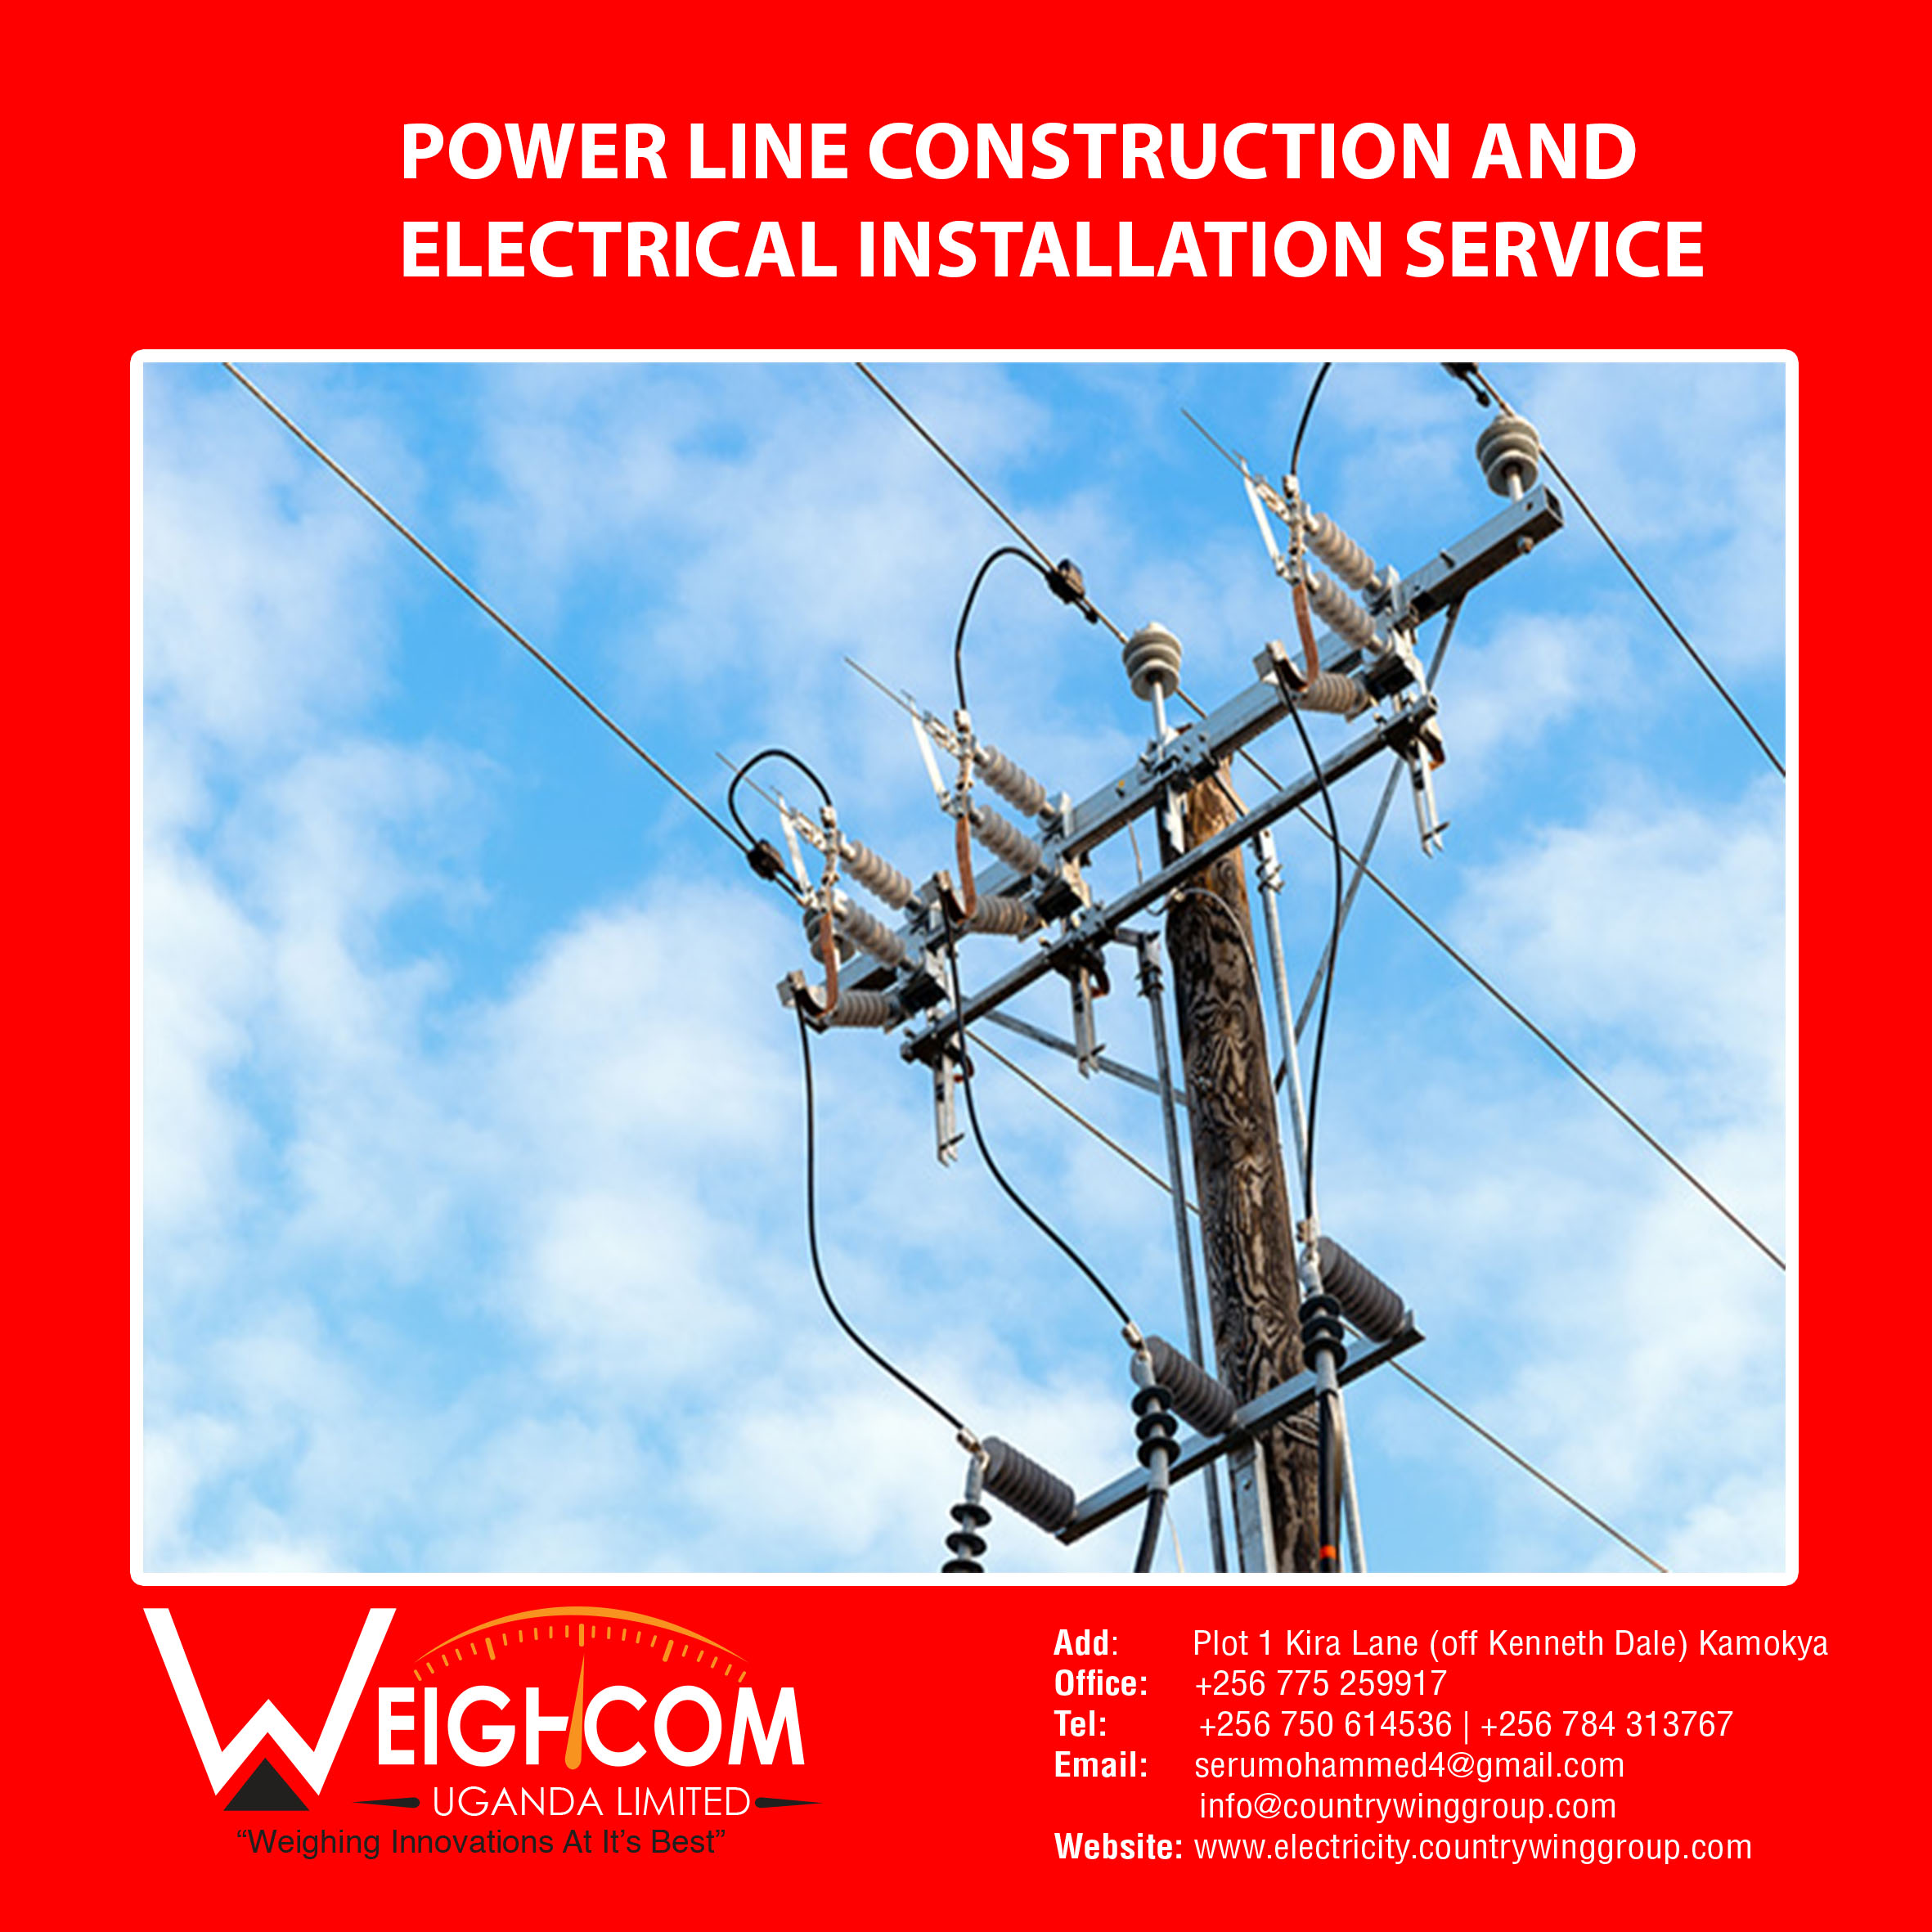 who constructs power lines in Uganda? we do.